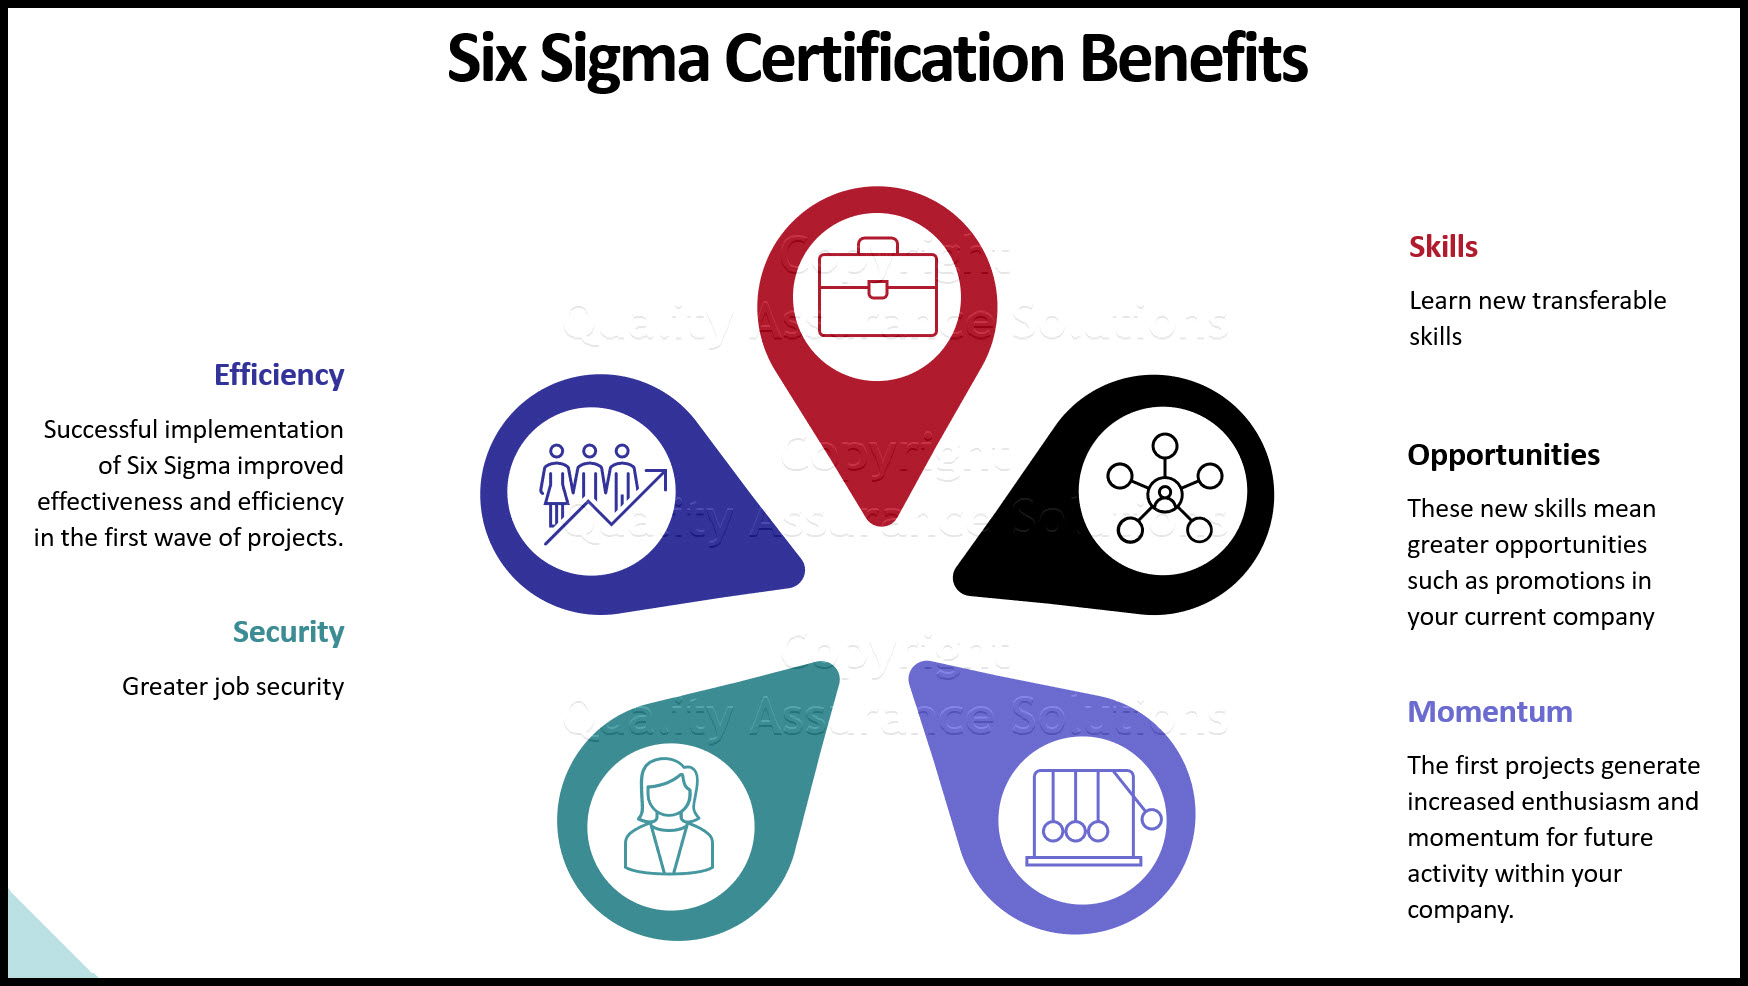 You might have heard or read about Six Sigma as organization after organization adopts and implements this powerful management philosophy. Learn more!